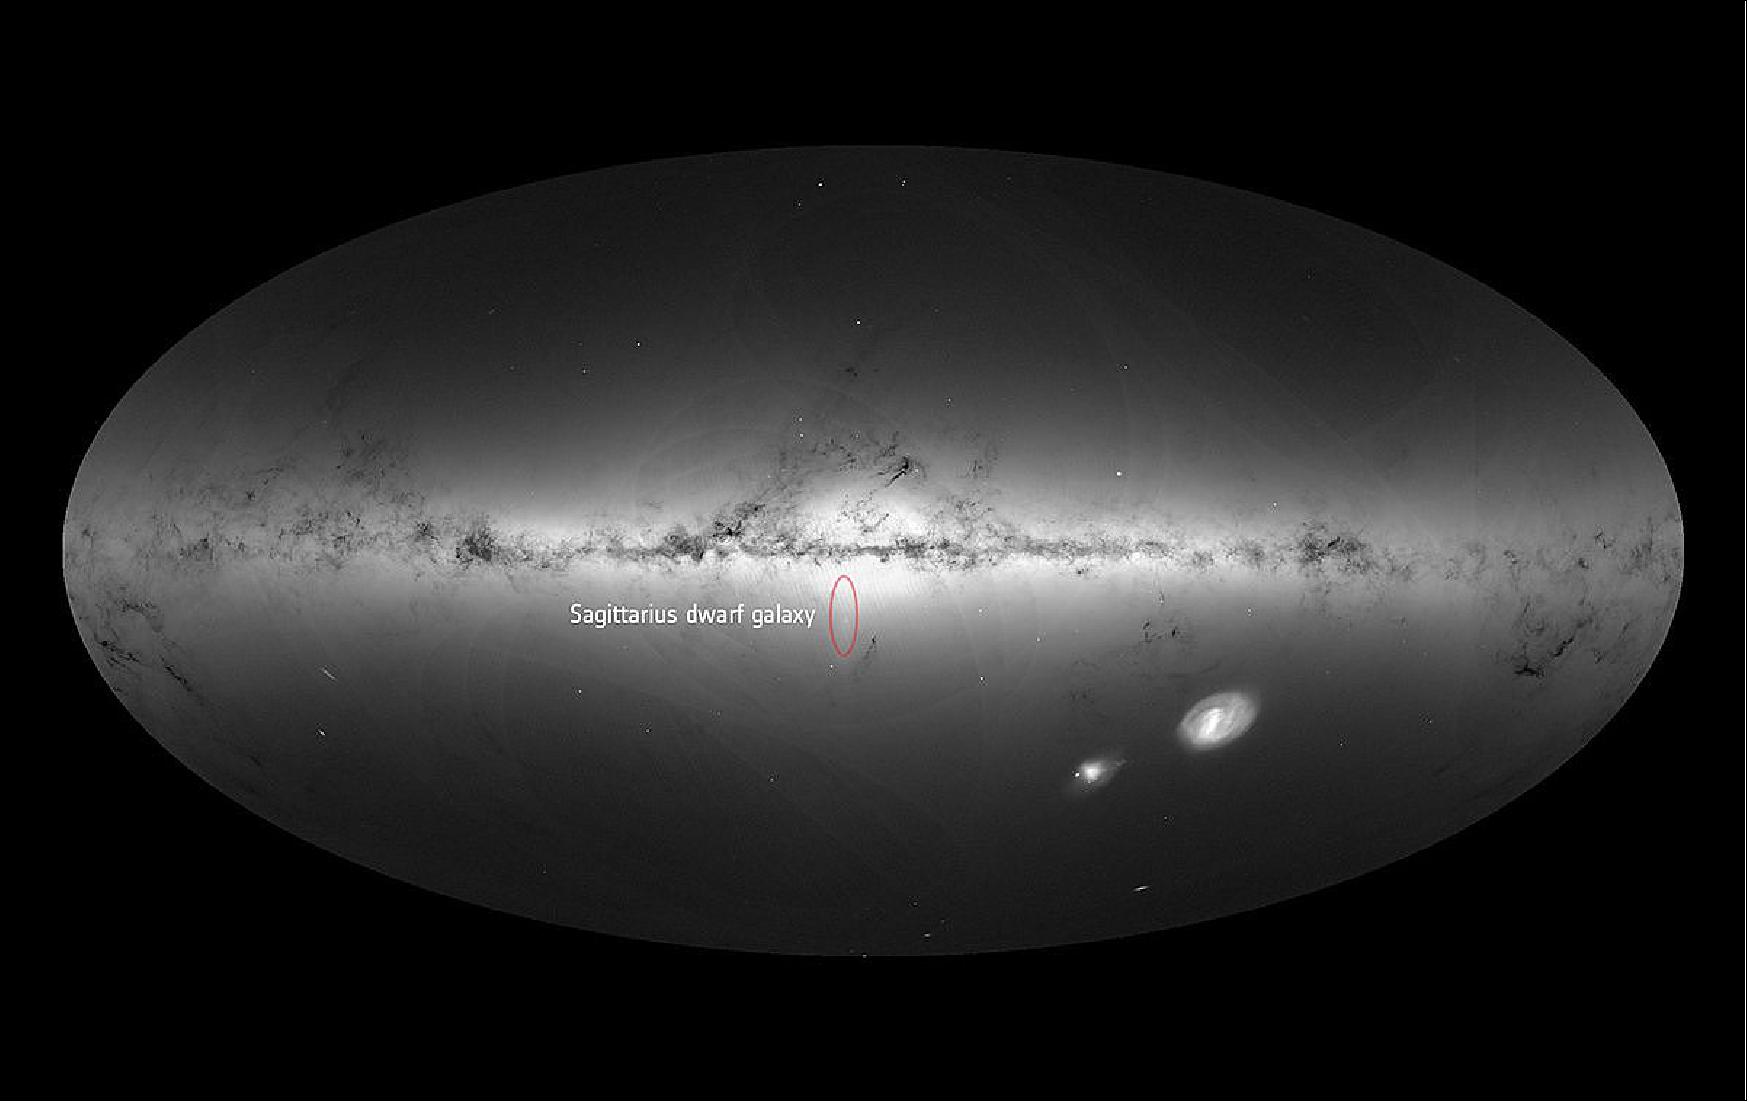 Figure 72: The Sagittarius dwarf galaxy, a small satellite of the Milky Way that is leaving a stream of stars behind as an effect of our Galaxy's gravitational tug, is visible as an elongated feature below the Galactic center and pointing in the downwards direction in the all-sky map of the density of stars observed by ESA's Gaia mission between July 2014 to May 2016. Scientists analyzing data from Gaia's second release have shown our Milky Way galaxy is still enduring the effects of a near collision that set millions of stars moving like ripples on a pond. The close encounter likely took place sometime in the past 300–900 million years, and the culprit could be the Sagittarius dwarf galaxy (image credit: ESA/Gaia/DPAC, CC BY-SA 3.0 IGO)